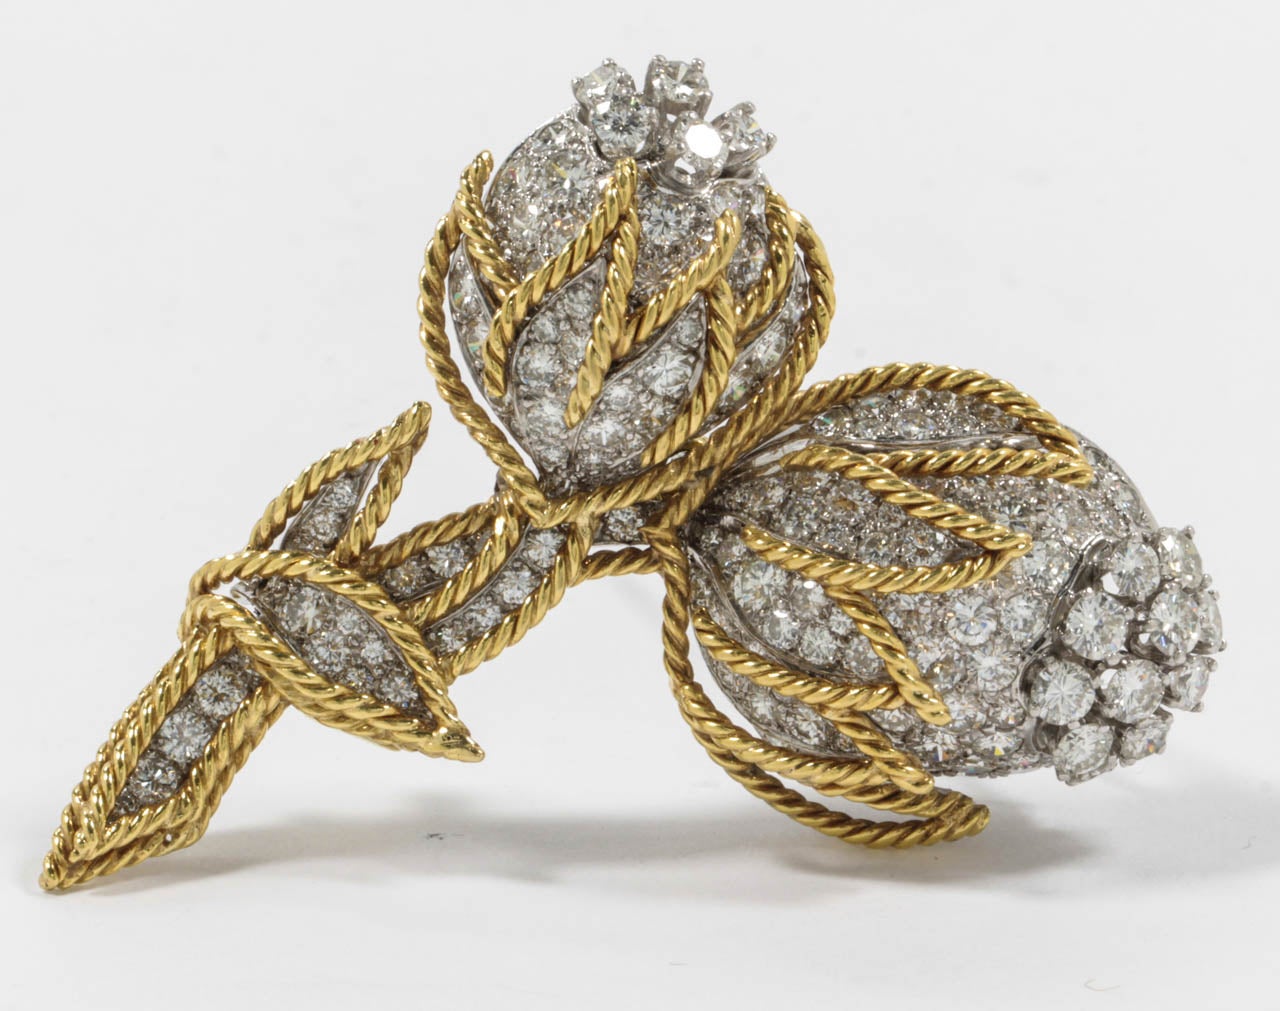 The diamond Flower set with brilliant-cut diamonds, in a Yellow Gold cage.